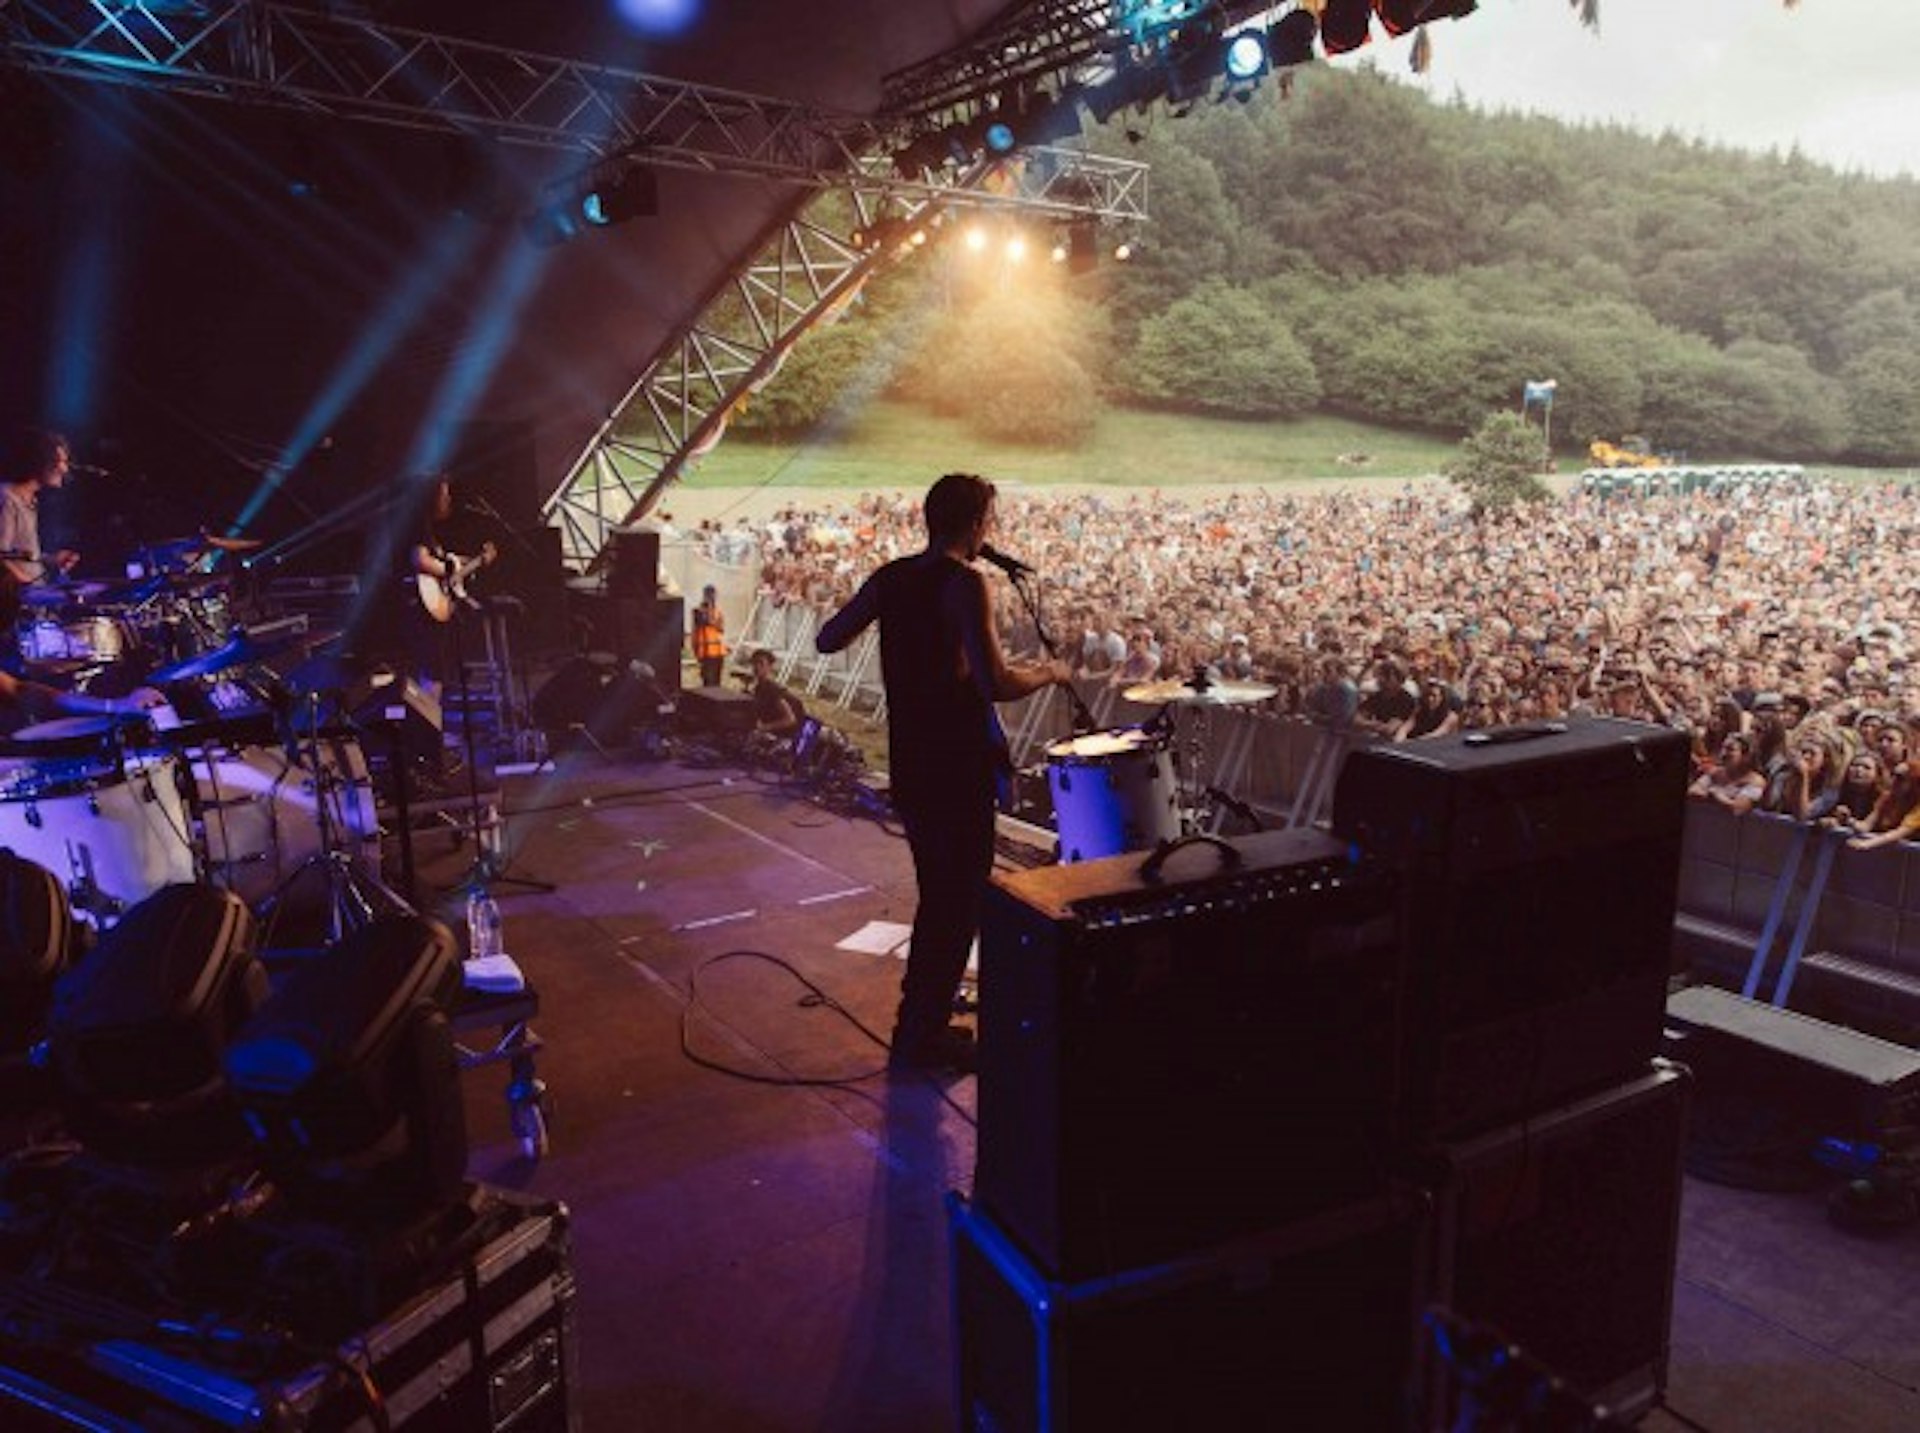 Half Moon Run play to a packed main stage. Photo by Ben Langley